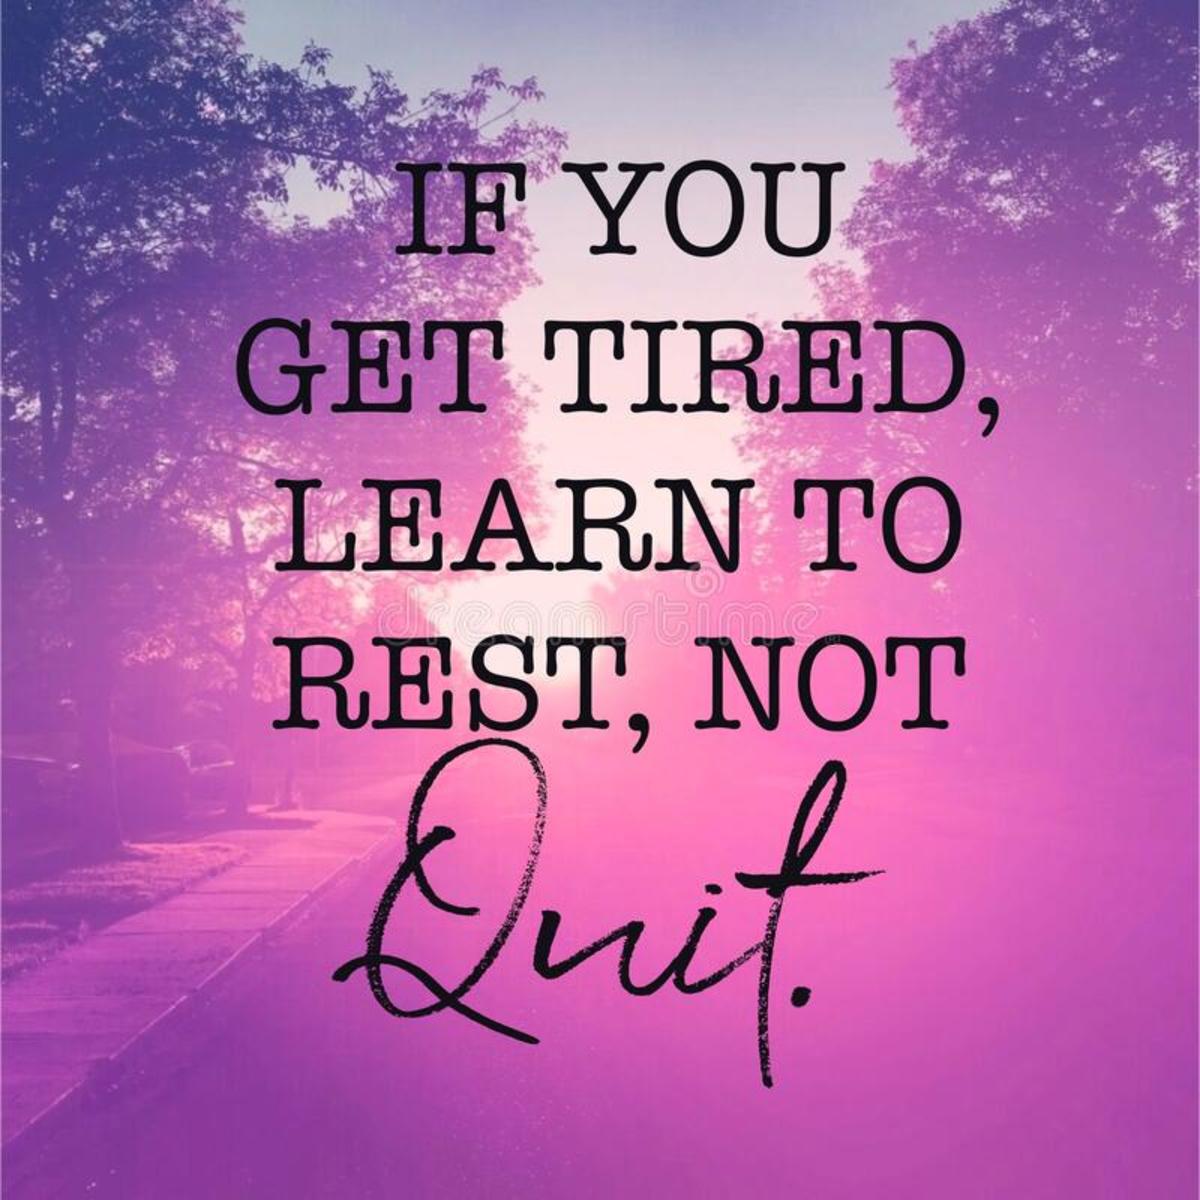 Rest : An Important Factor Of Life